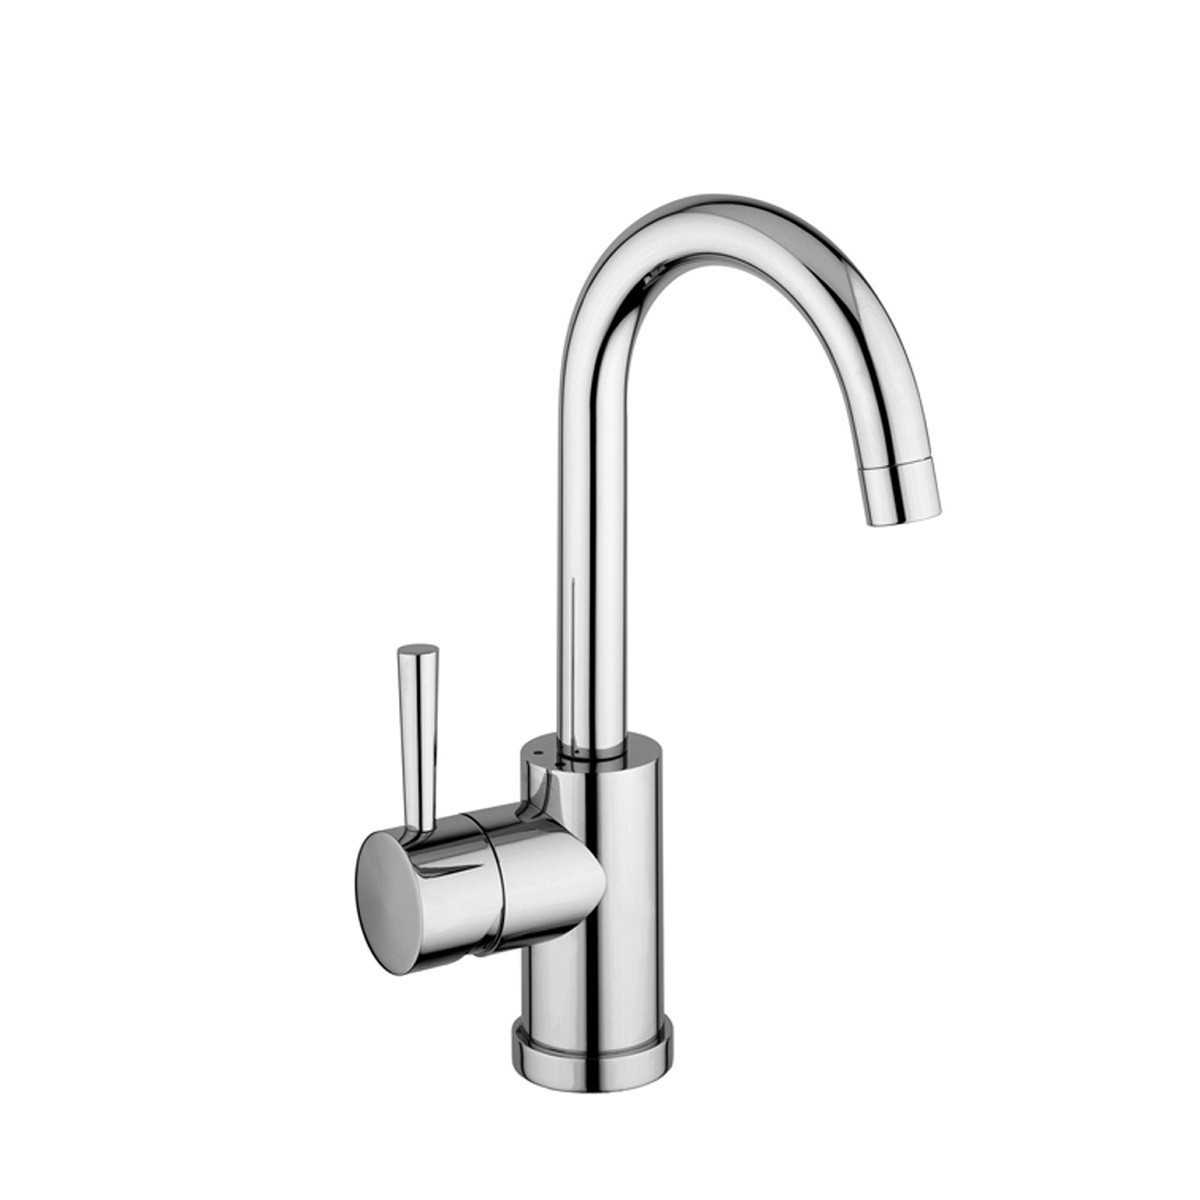 WS Bath Collections Evo 078 Single Lever Bathroom Faucet With High